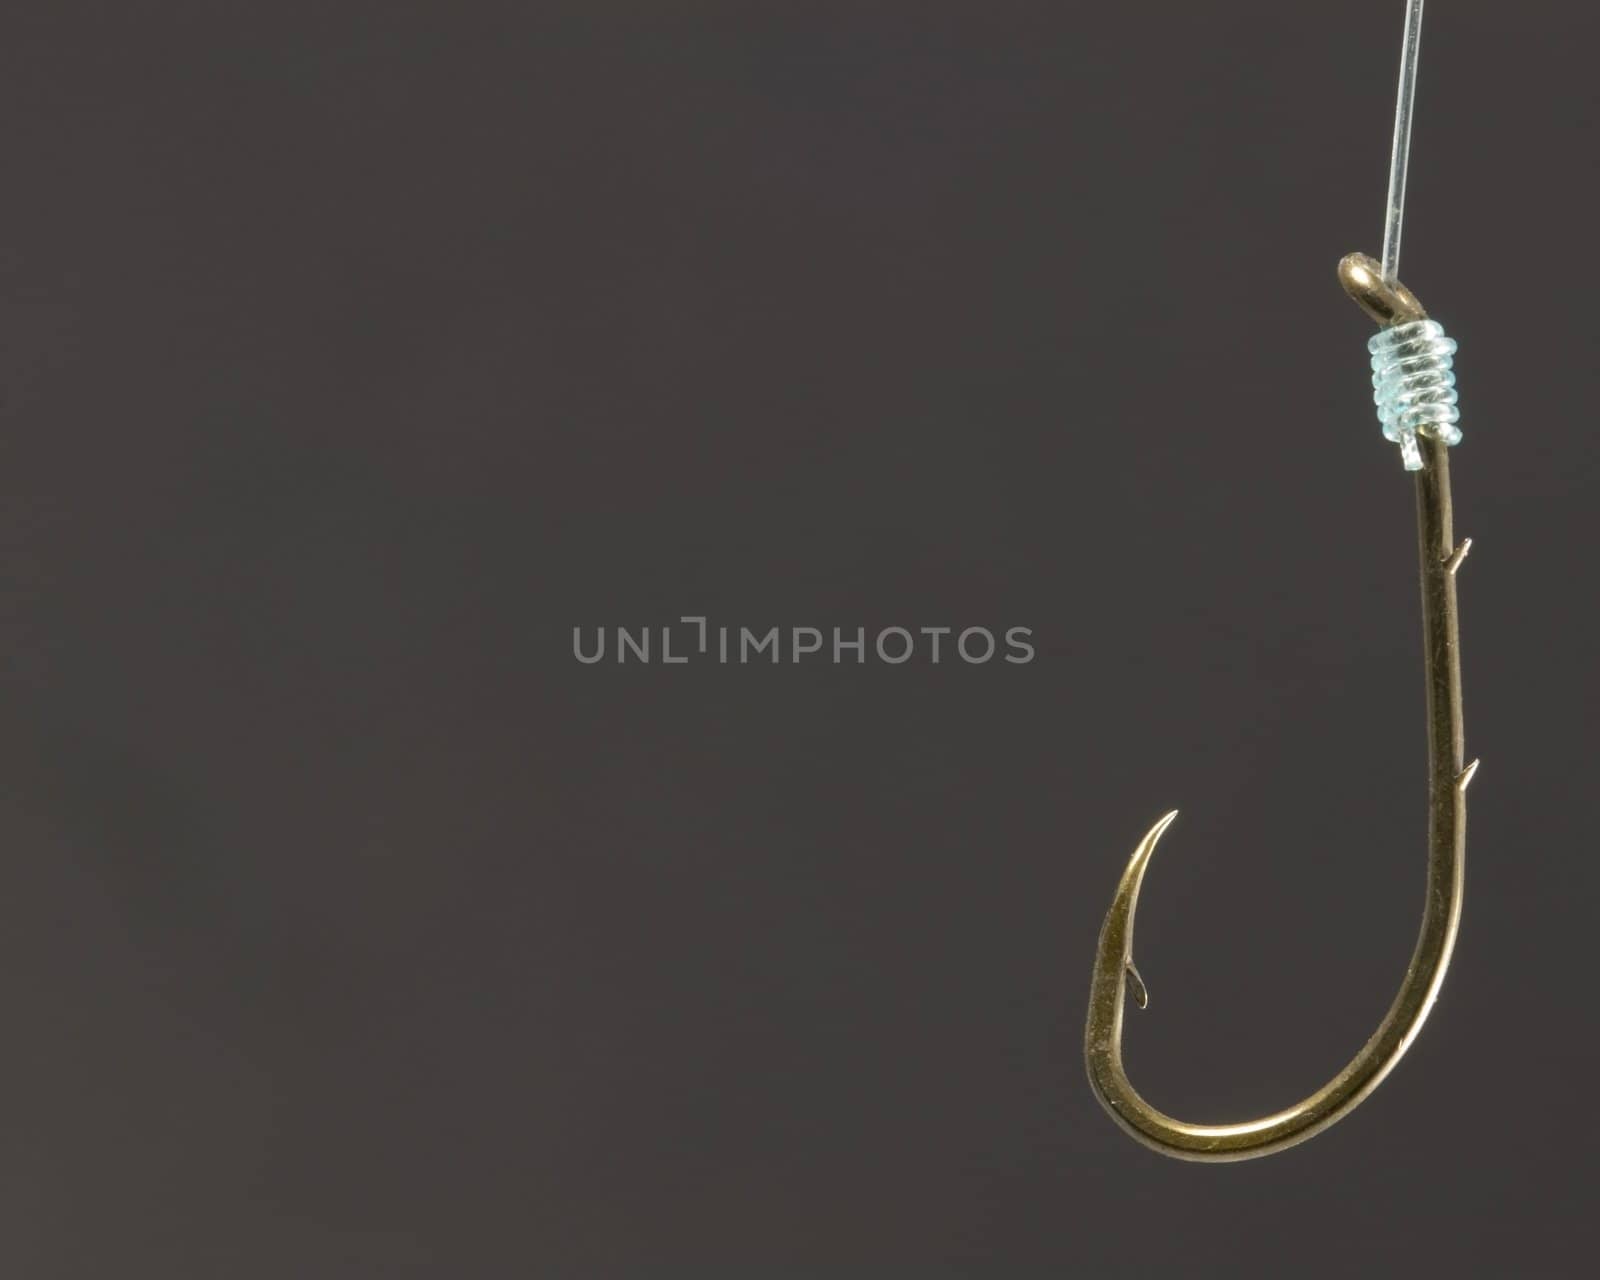 A close-up of a fishing hook on fishing line.